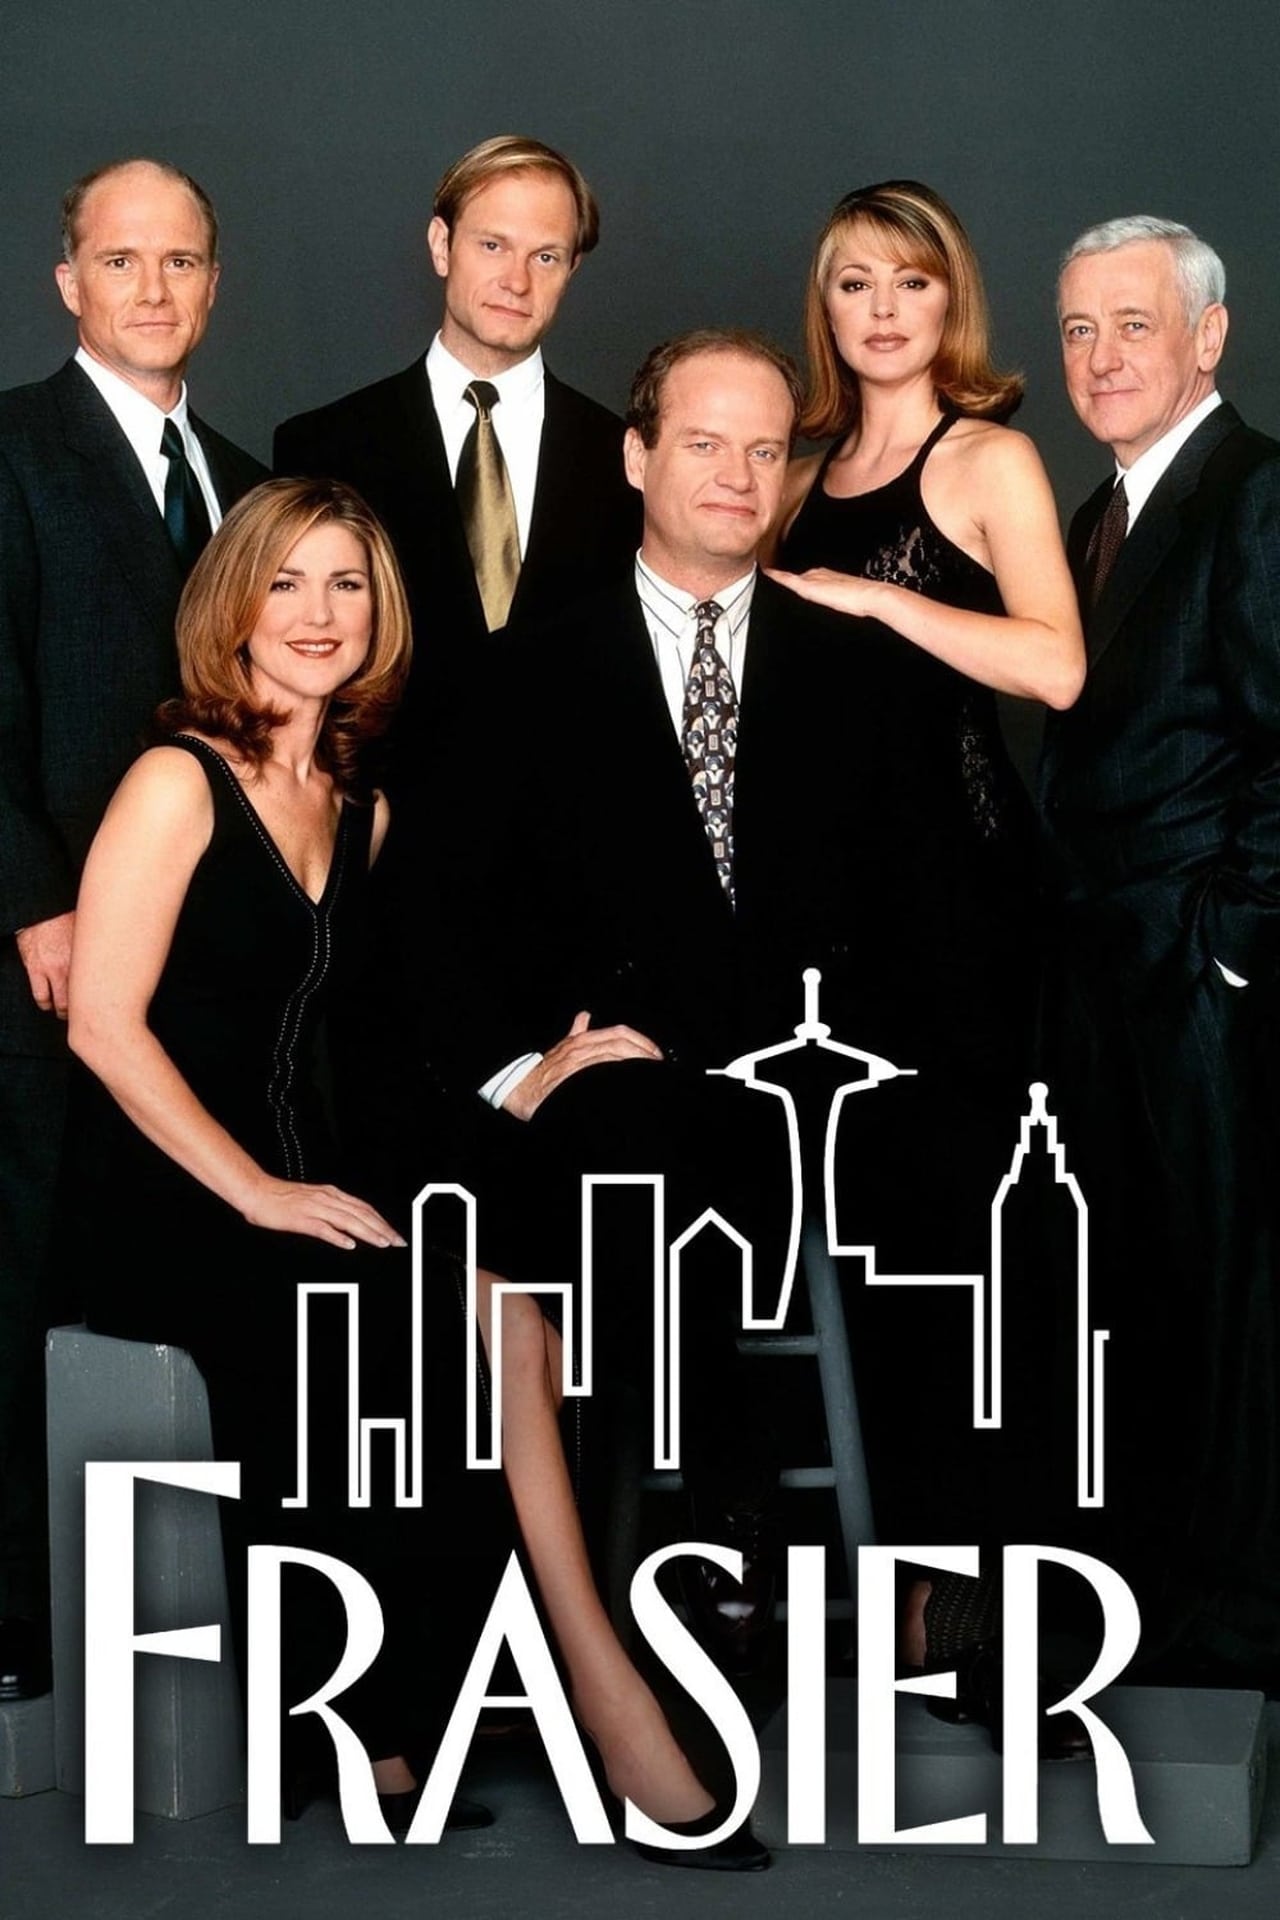 Frasier, Season 1 release date, trailers, cast, synopsis and reviews